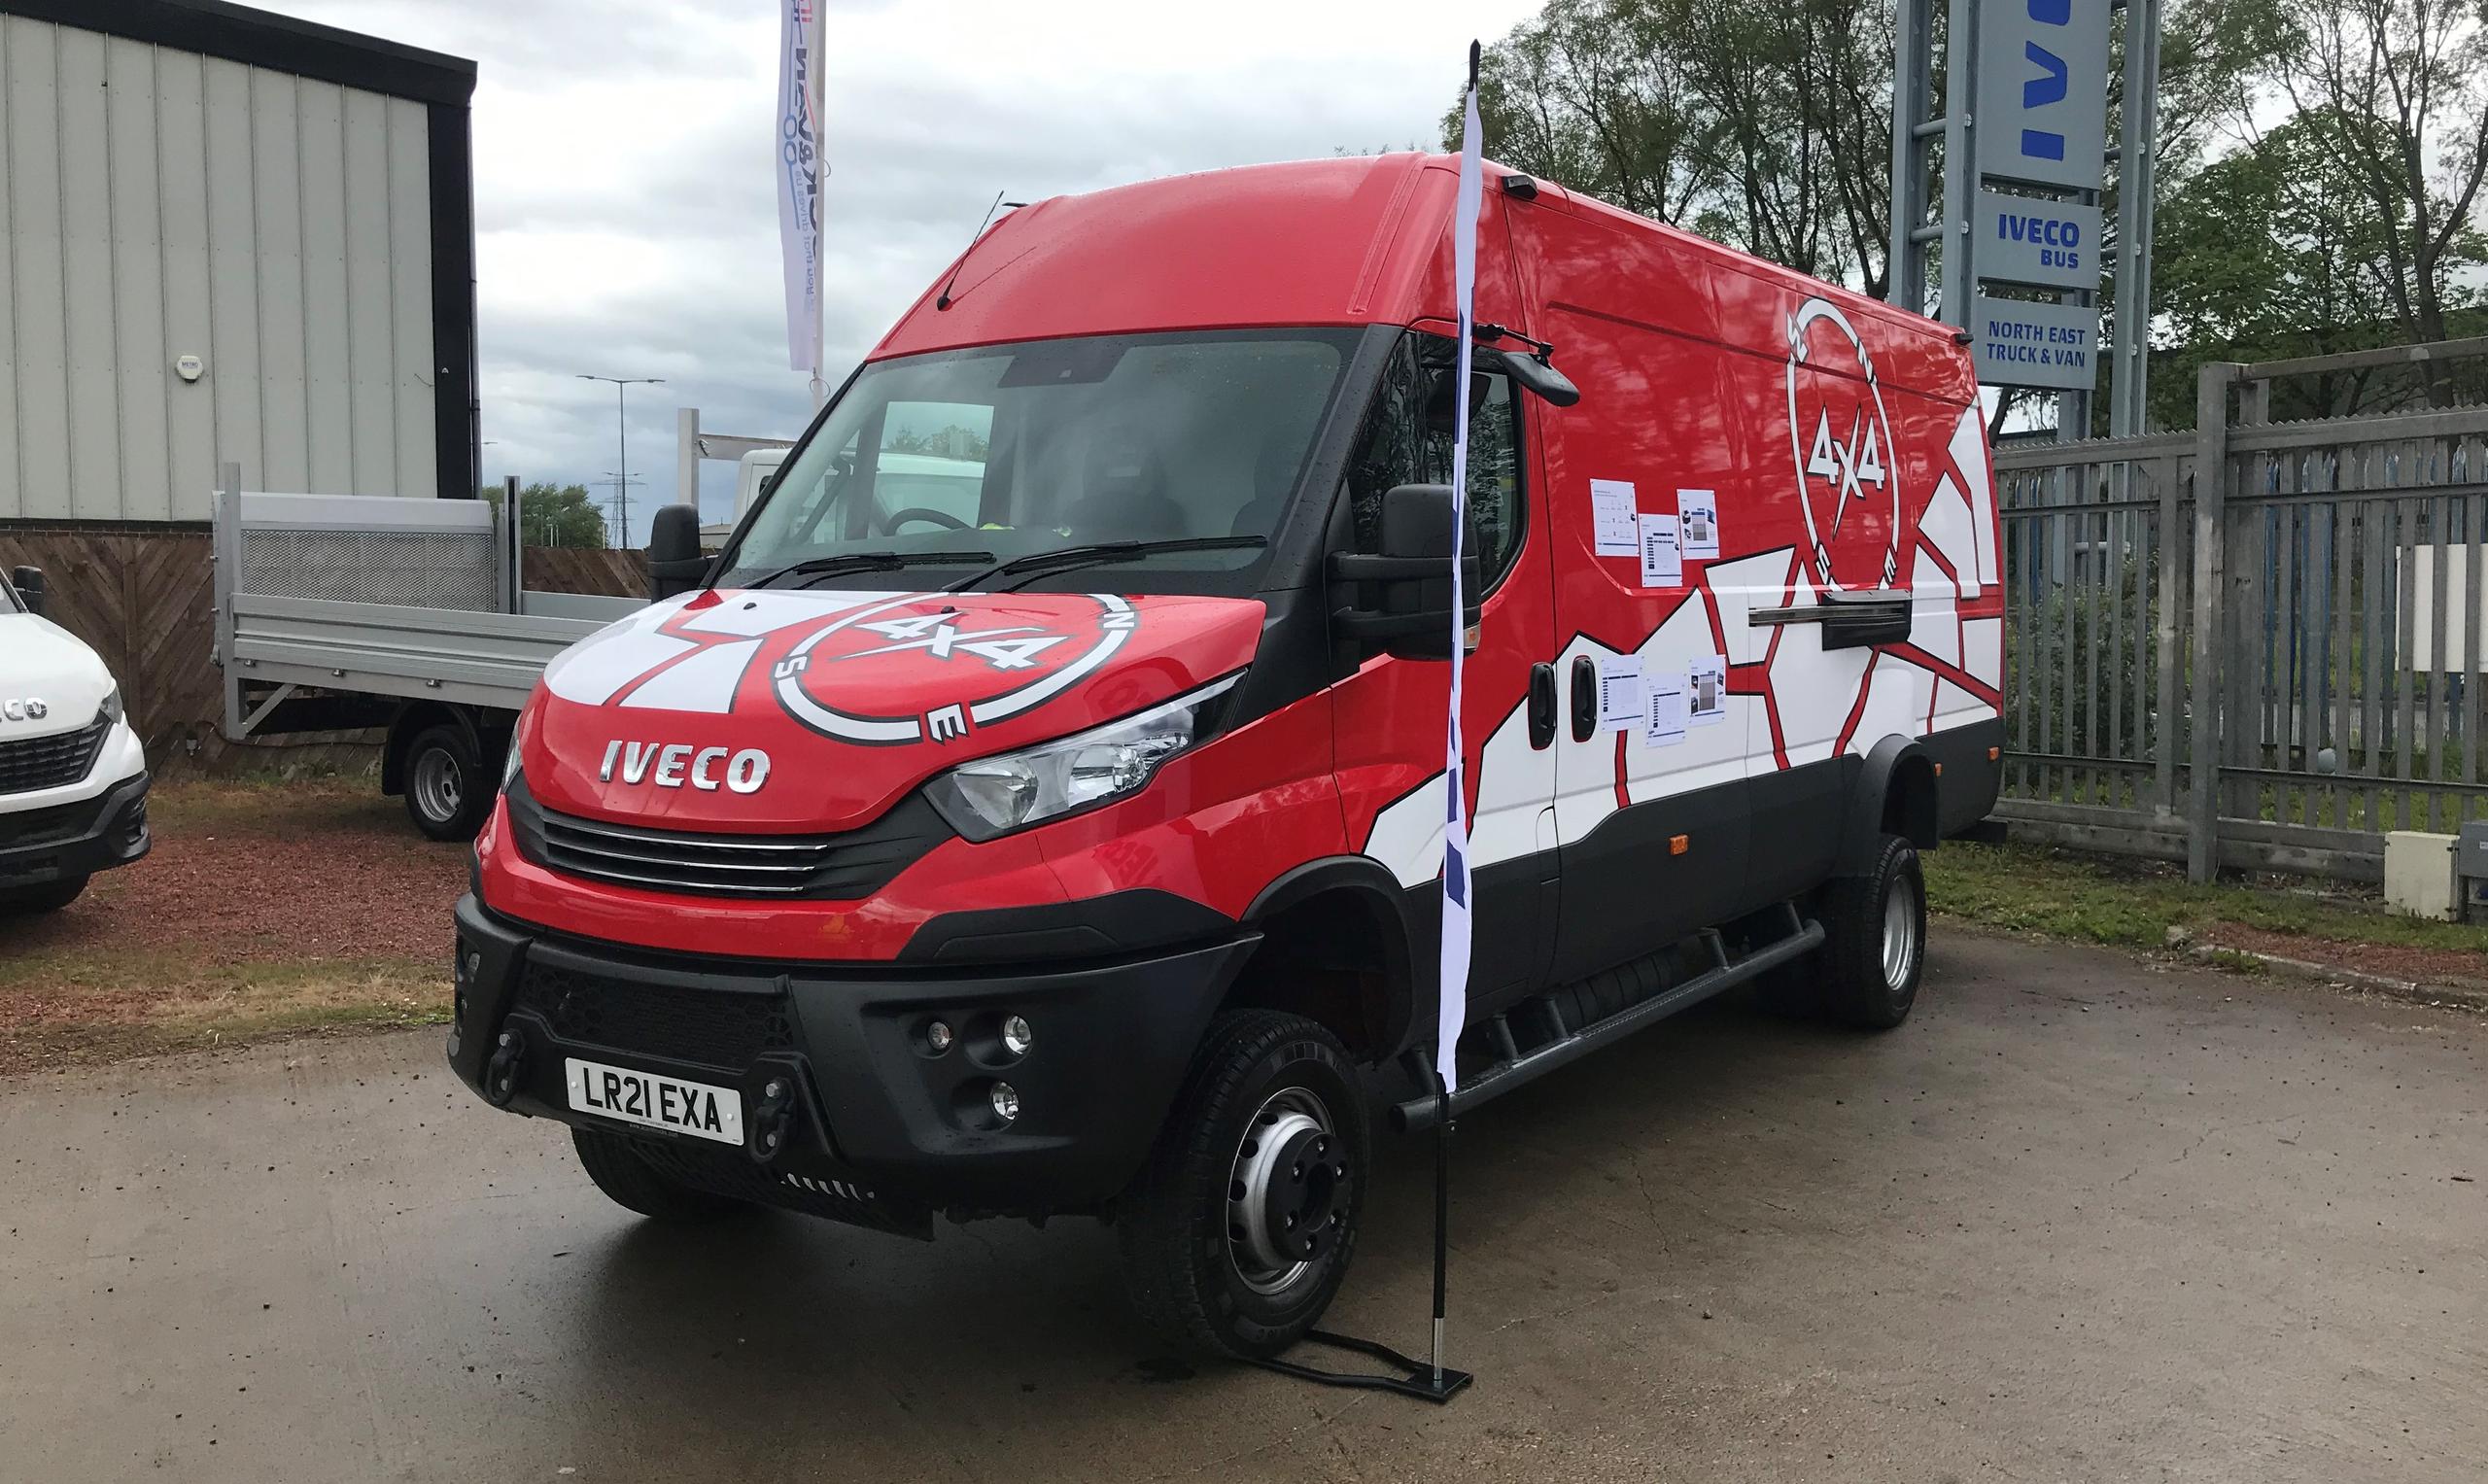 New IVECO Daily 4x4 Launch Tour coming to North East Truck and Van